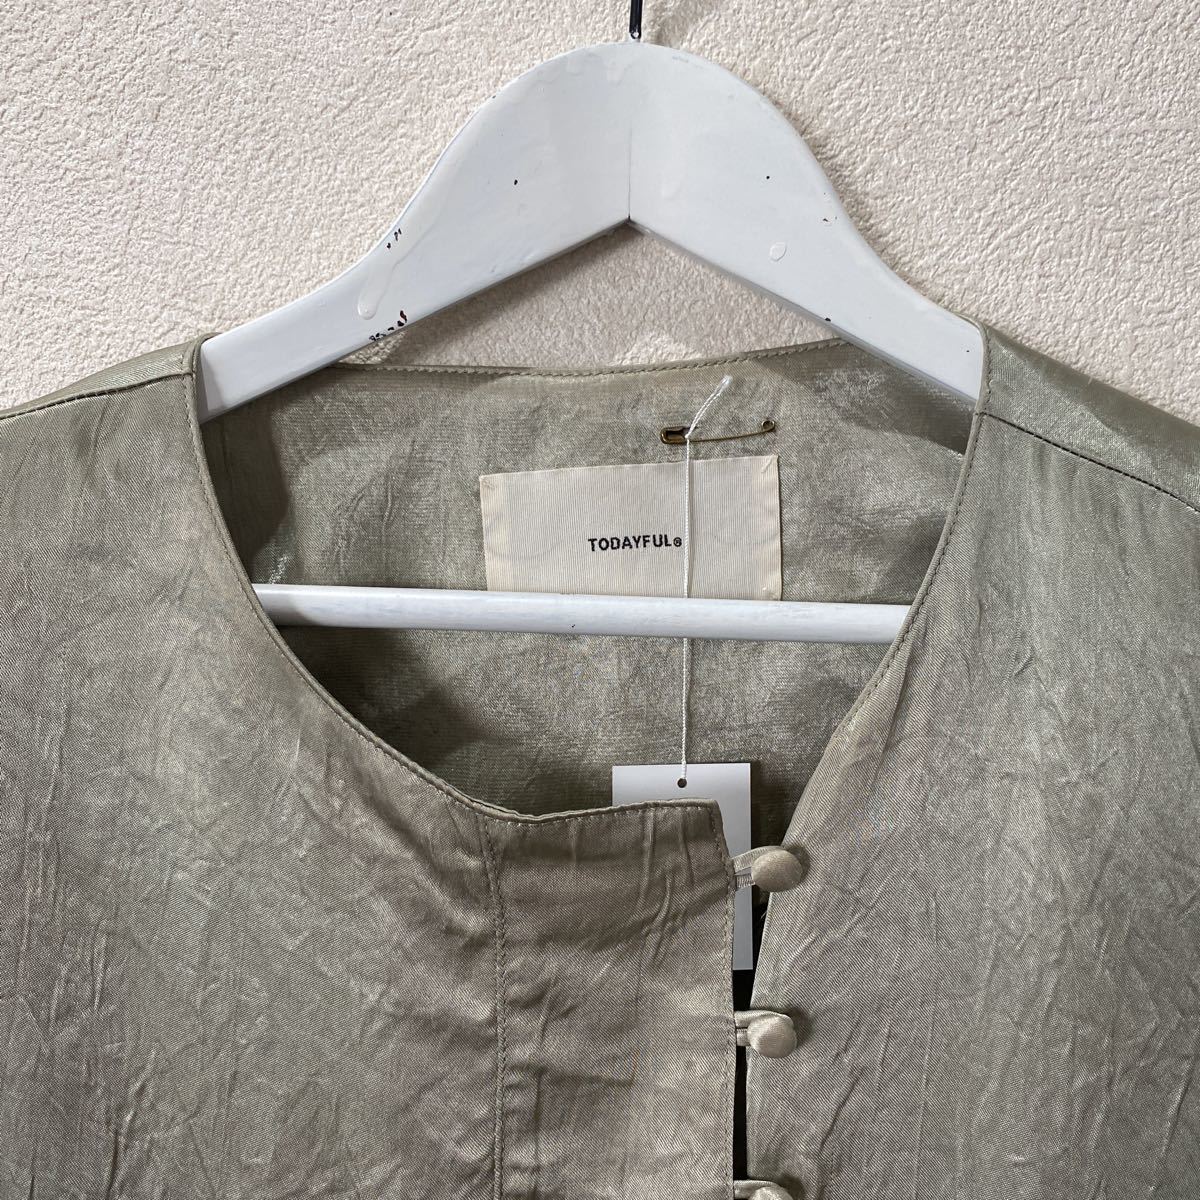 [ beautiful goods ]TODAYFUL Today full Vintage satin frill shirt F khaki pull over do Le Mans blouse tops cut and sewn F